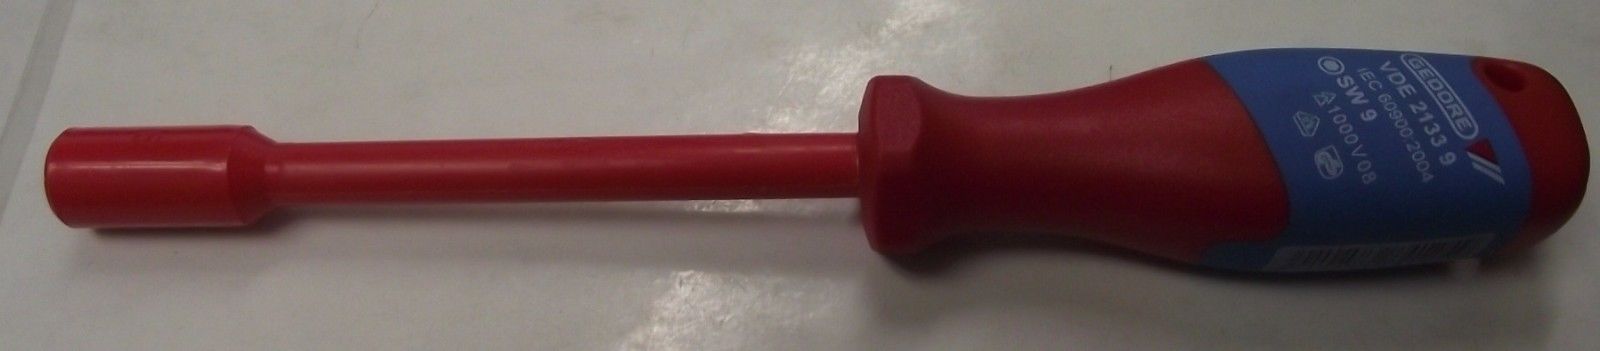 Gedore VDE 2133 9 Vde Insulated Socket Wrench With Handle 9 mm